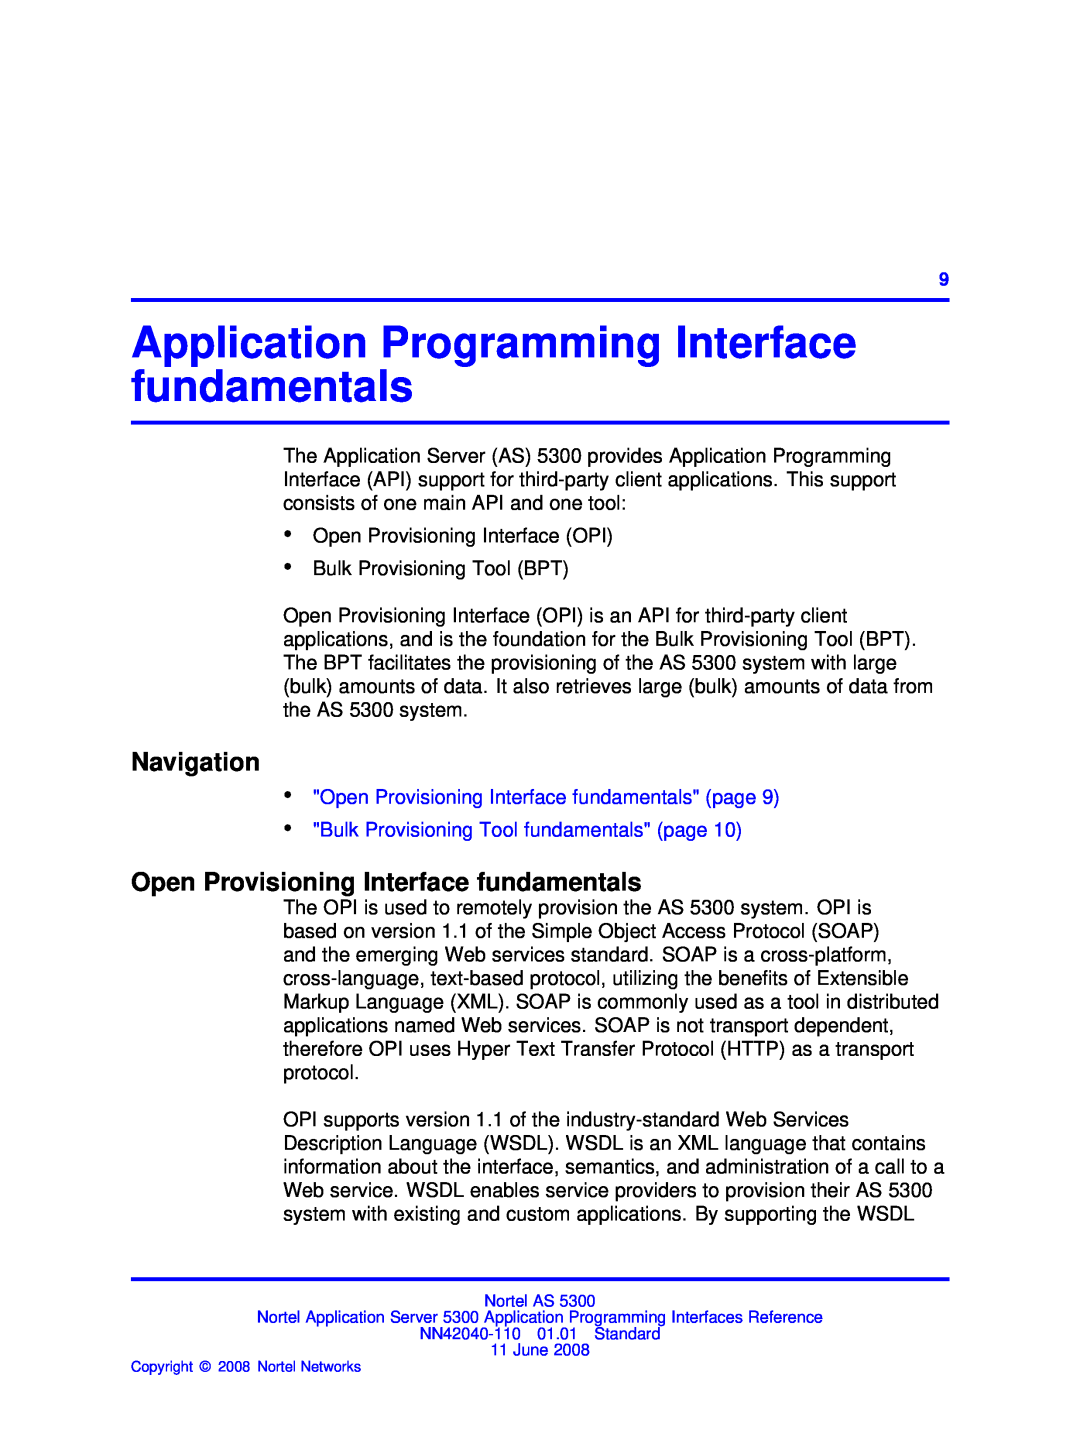 Nortel Networks AS 5300 manual Application Programming Interface fundamentals, Open Provisioning Interface fundamentals 